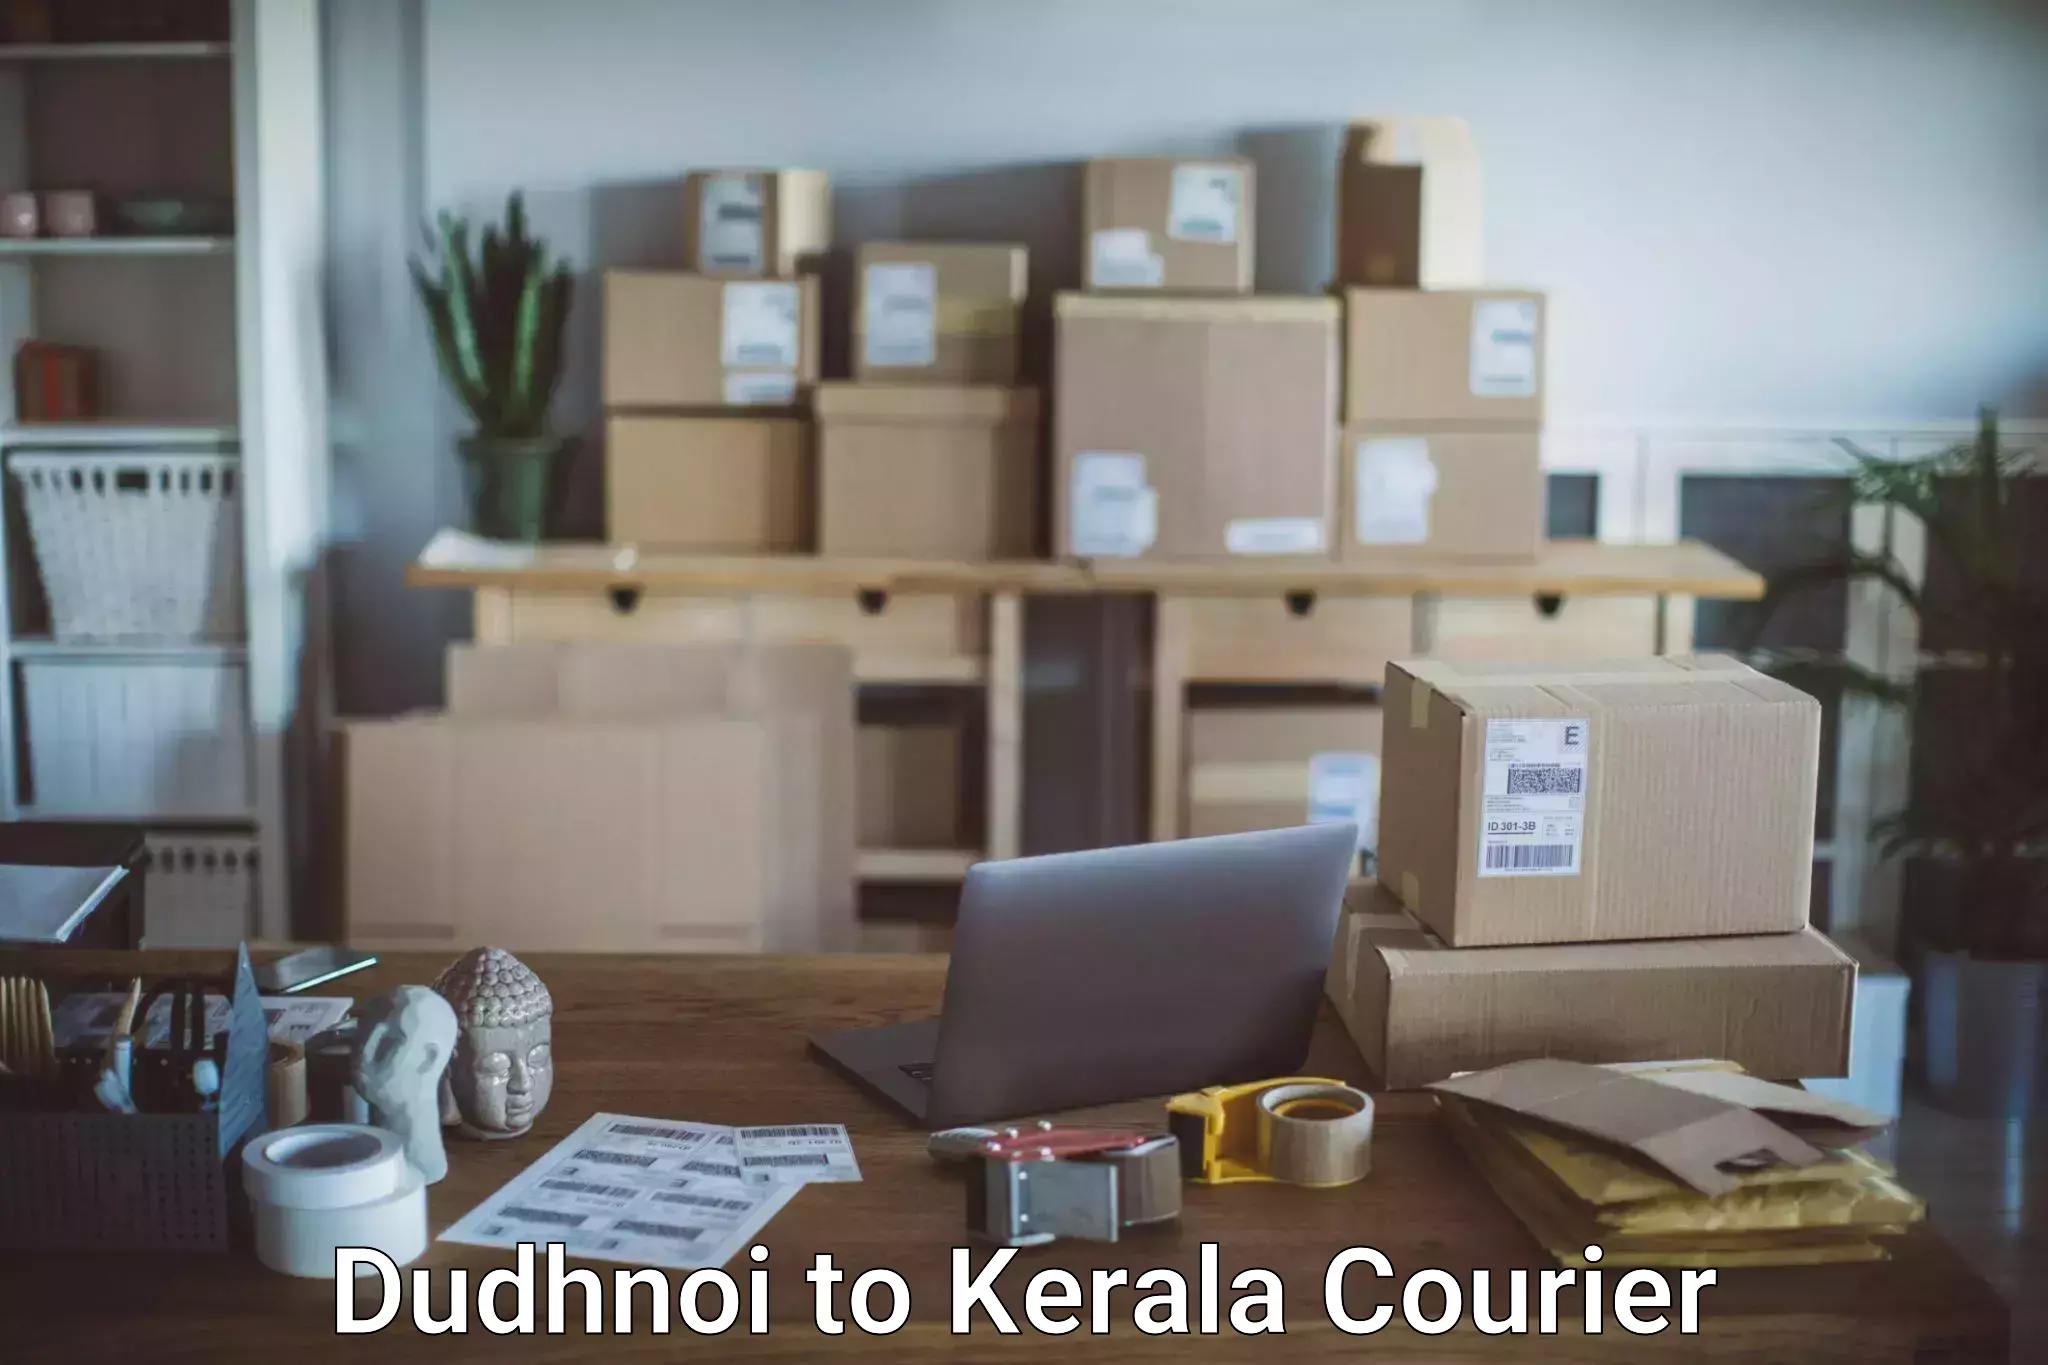 Weekend baggage shipping Dudhnoi to Cochin University of Science and Technology